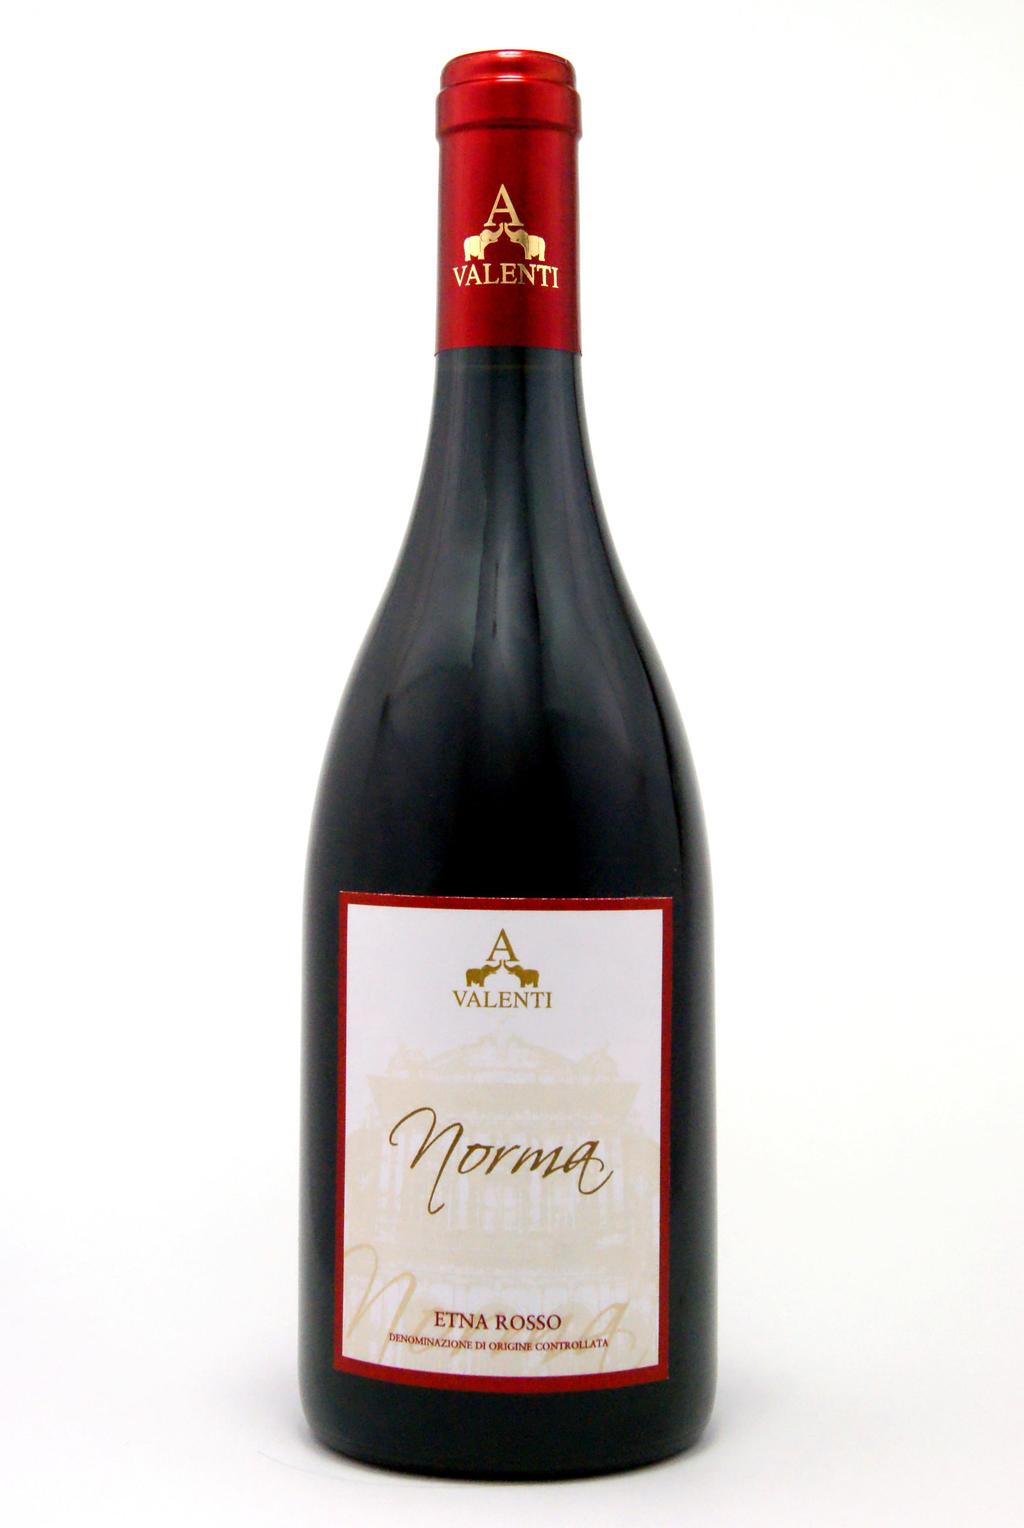 NORMA - ETNA ROSSO D.o.c. Nerello Mascalese, with a tiny amount of Nerello Capuccio (2%), all grown on the North Eastern slopes of Mount Etna, and given twelve months in large Slavonian oak 'botte'.